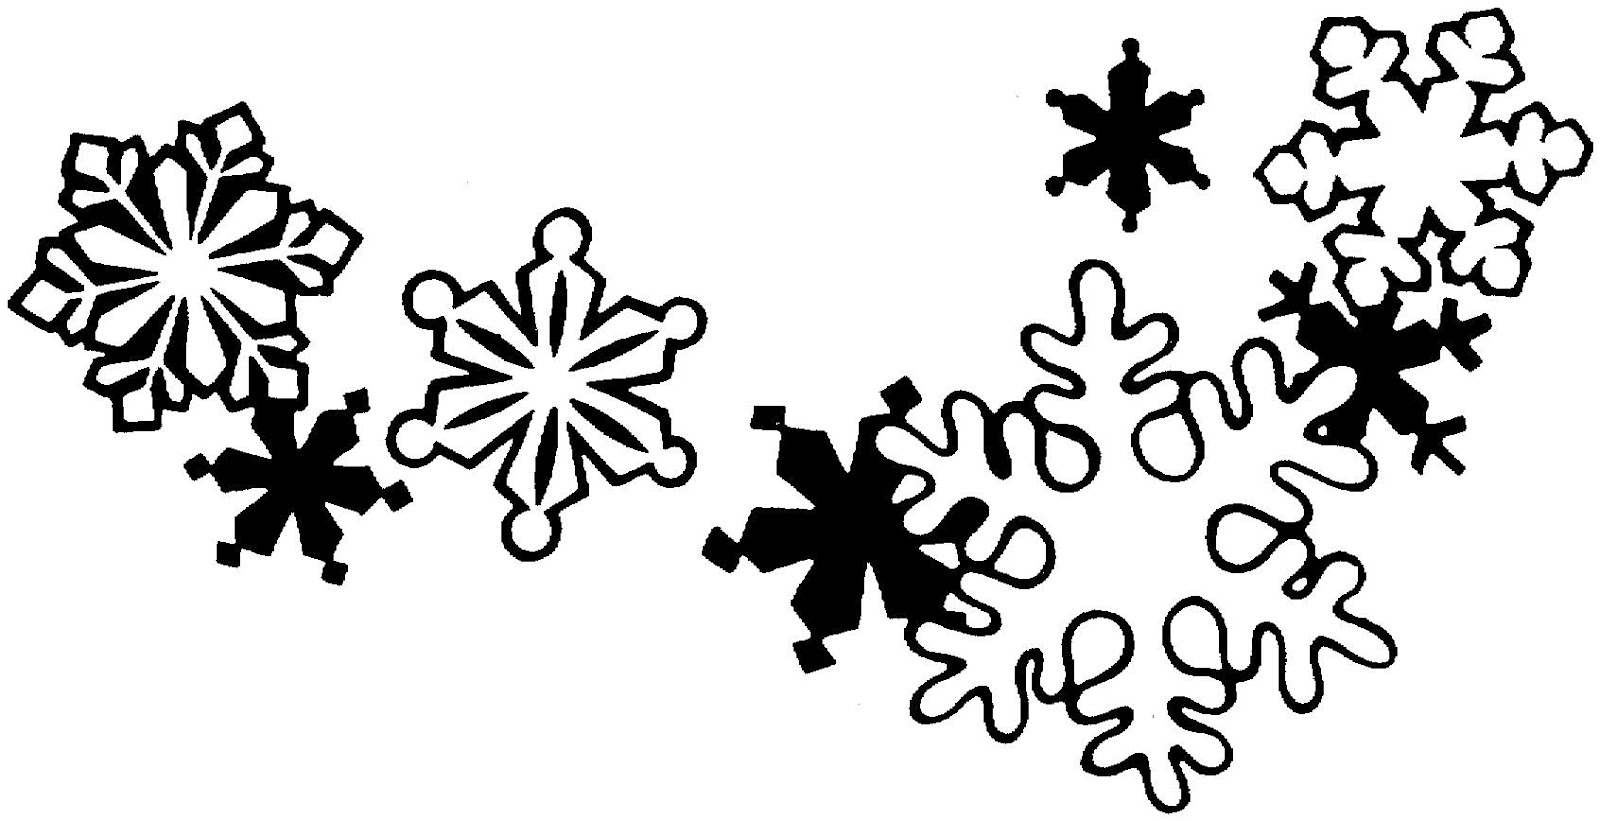 Free Black And White Snowflake Clipart, Download Free Clip